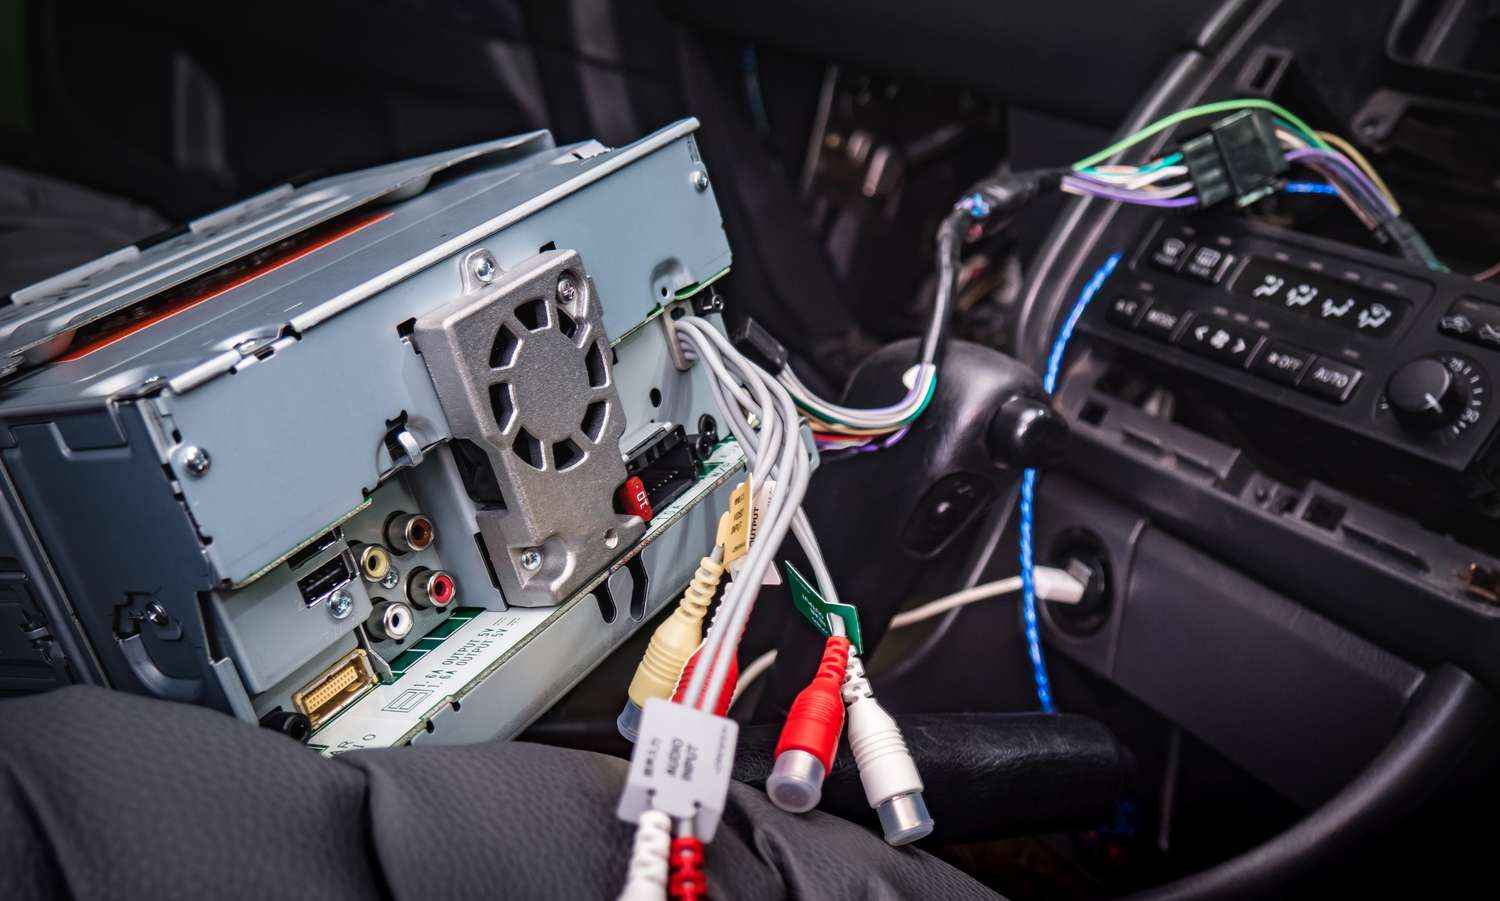 How To Change Stereo In Car